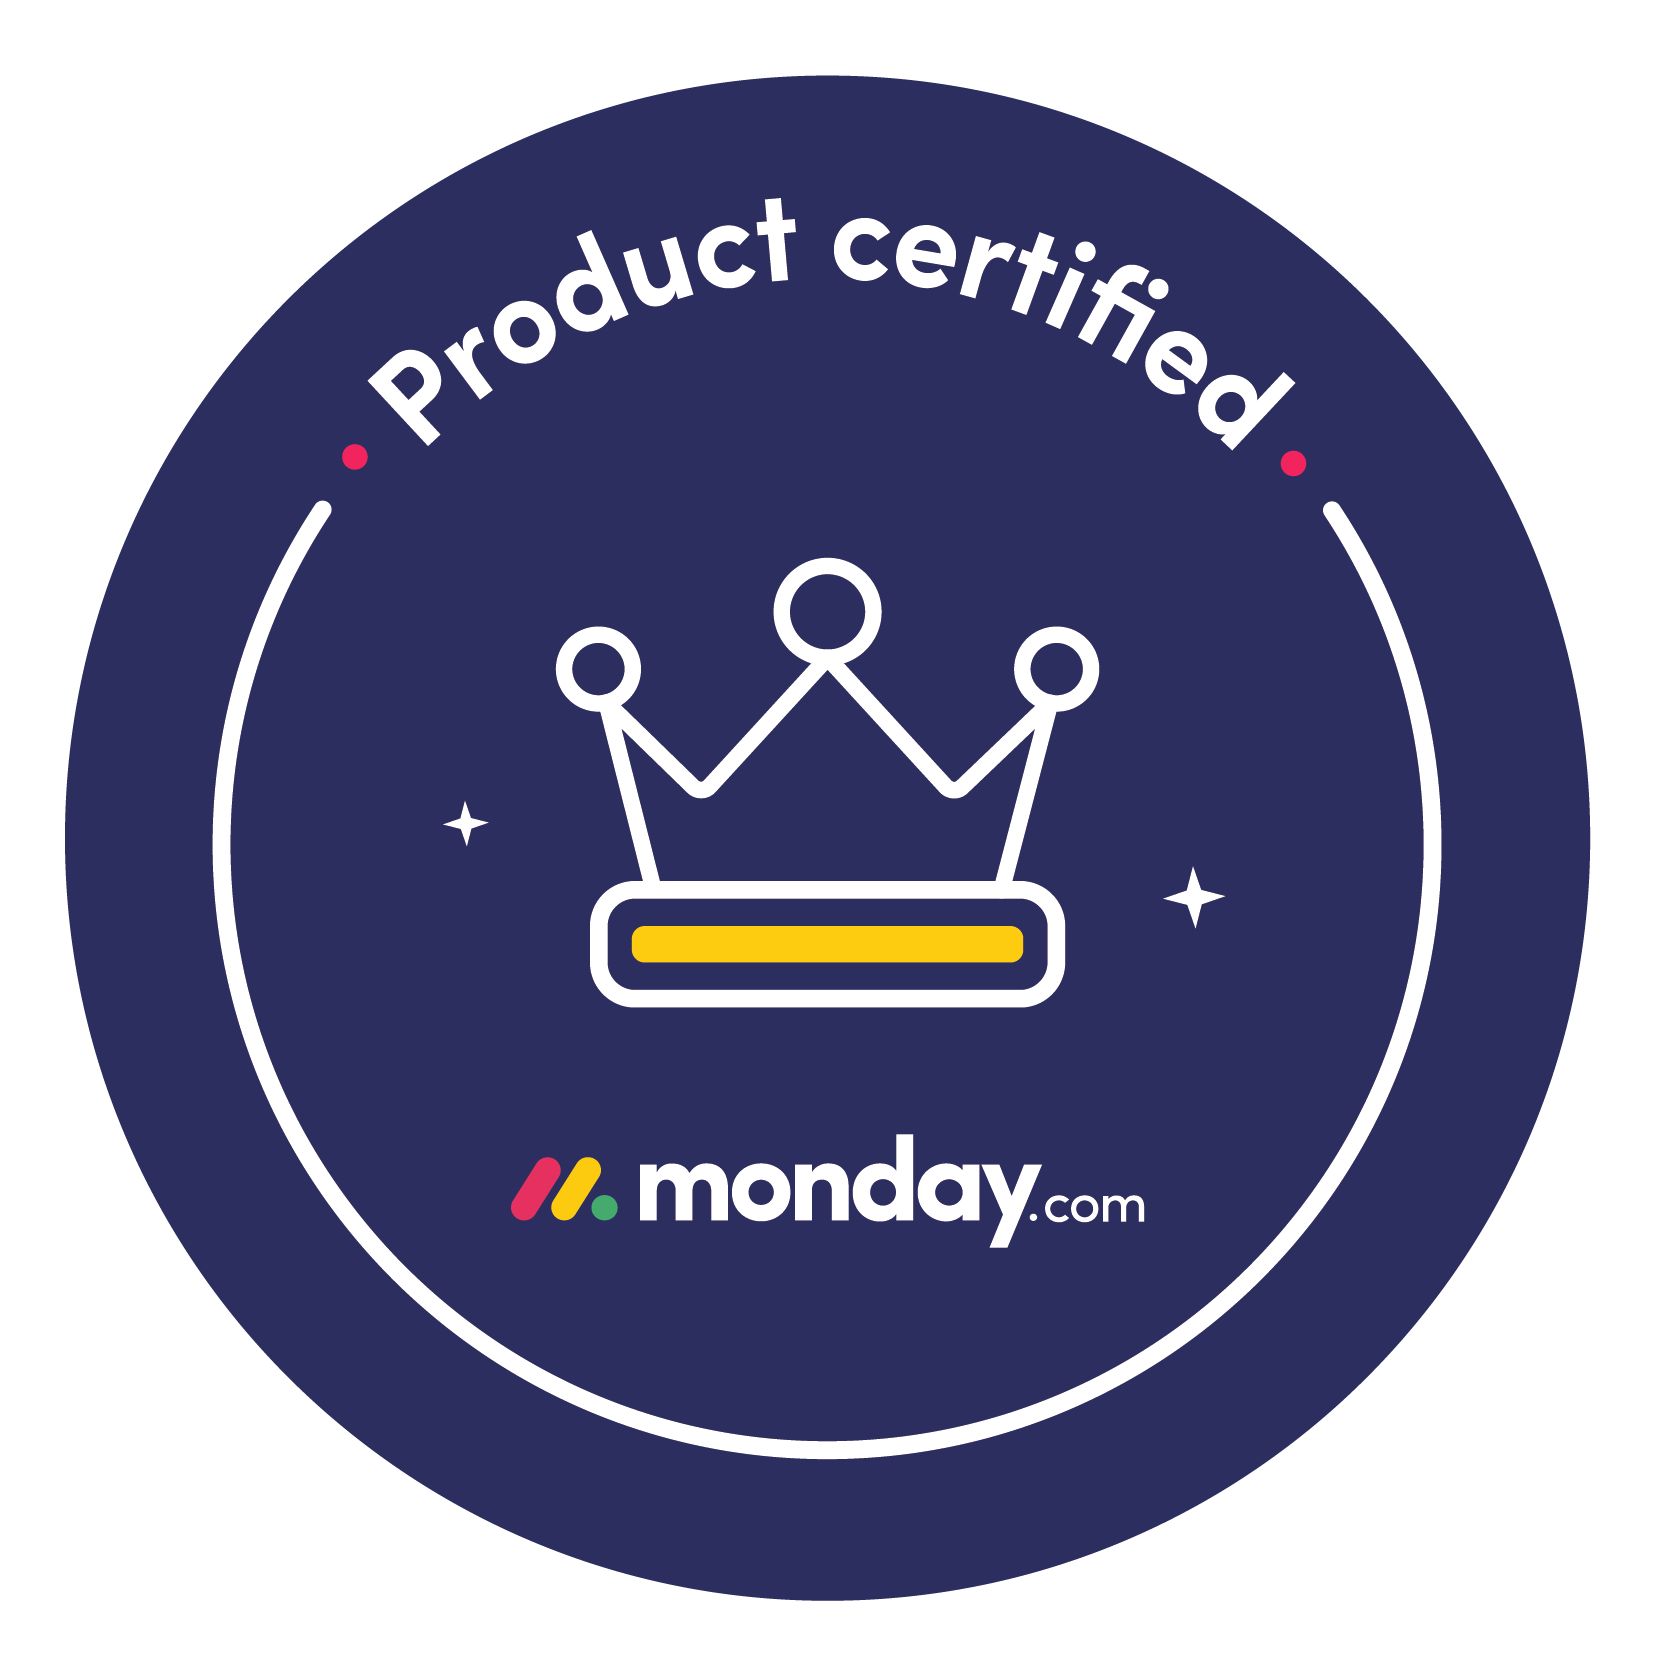 Monday Product Certified